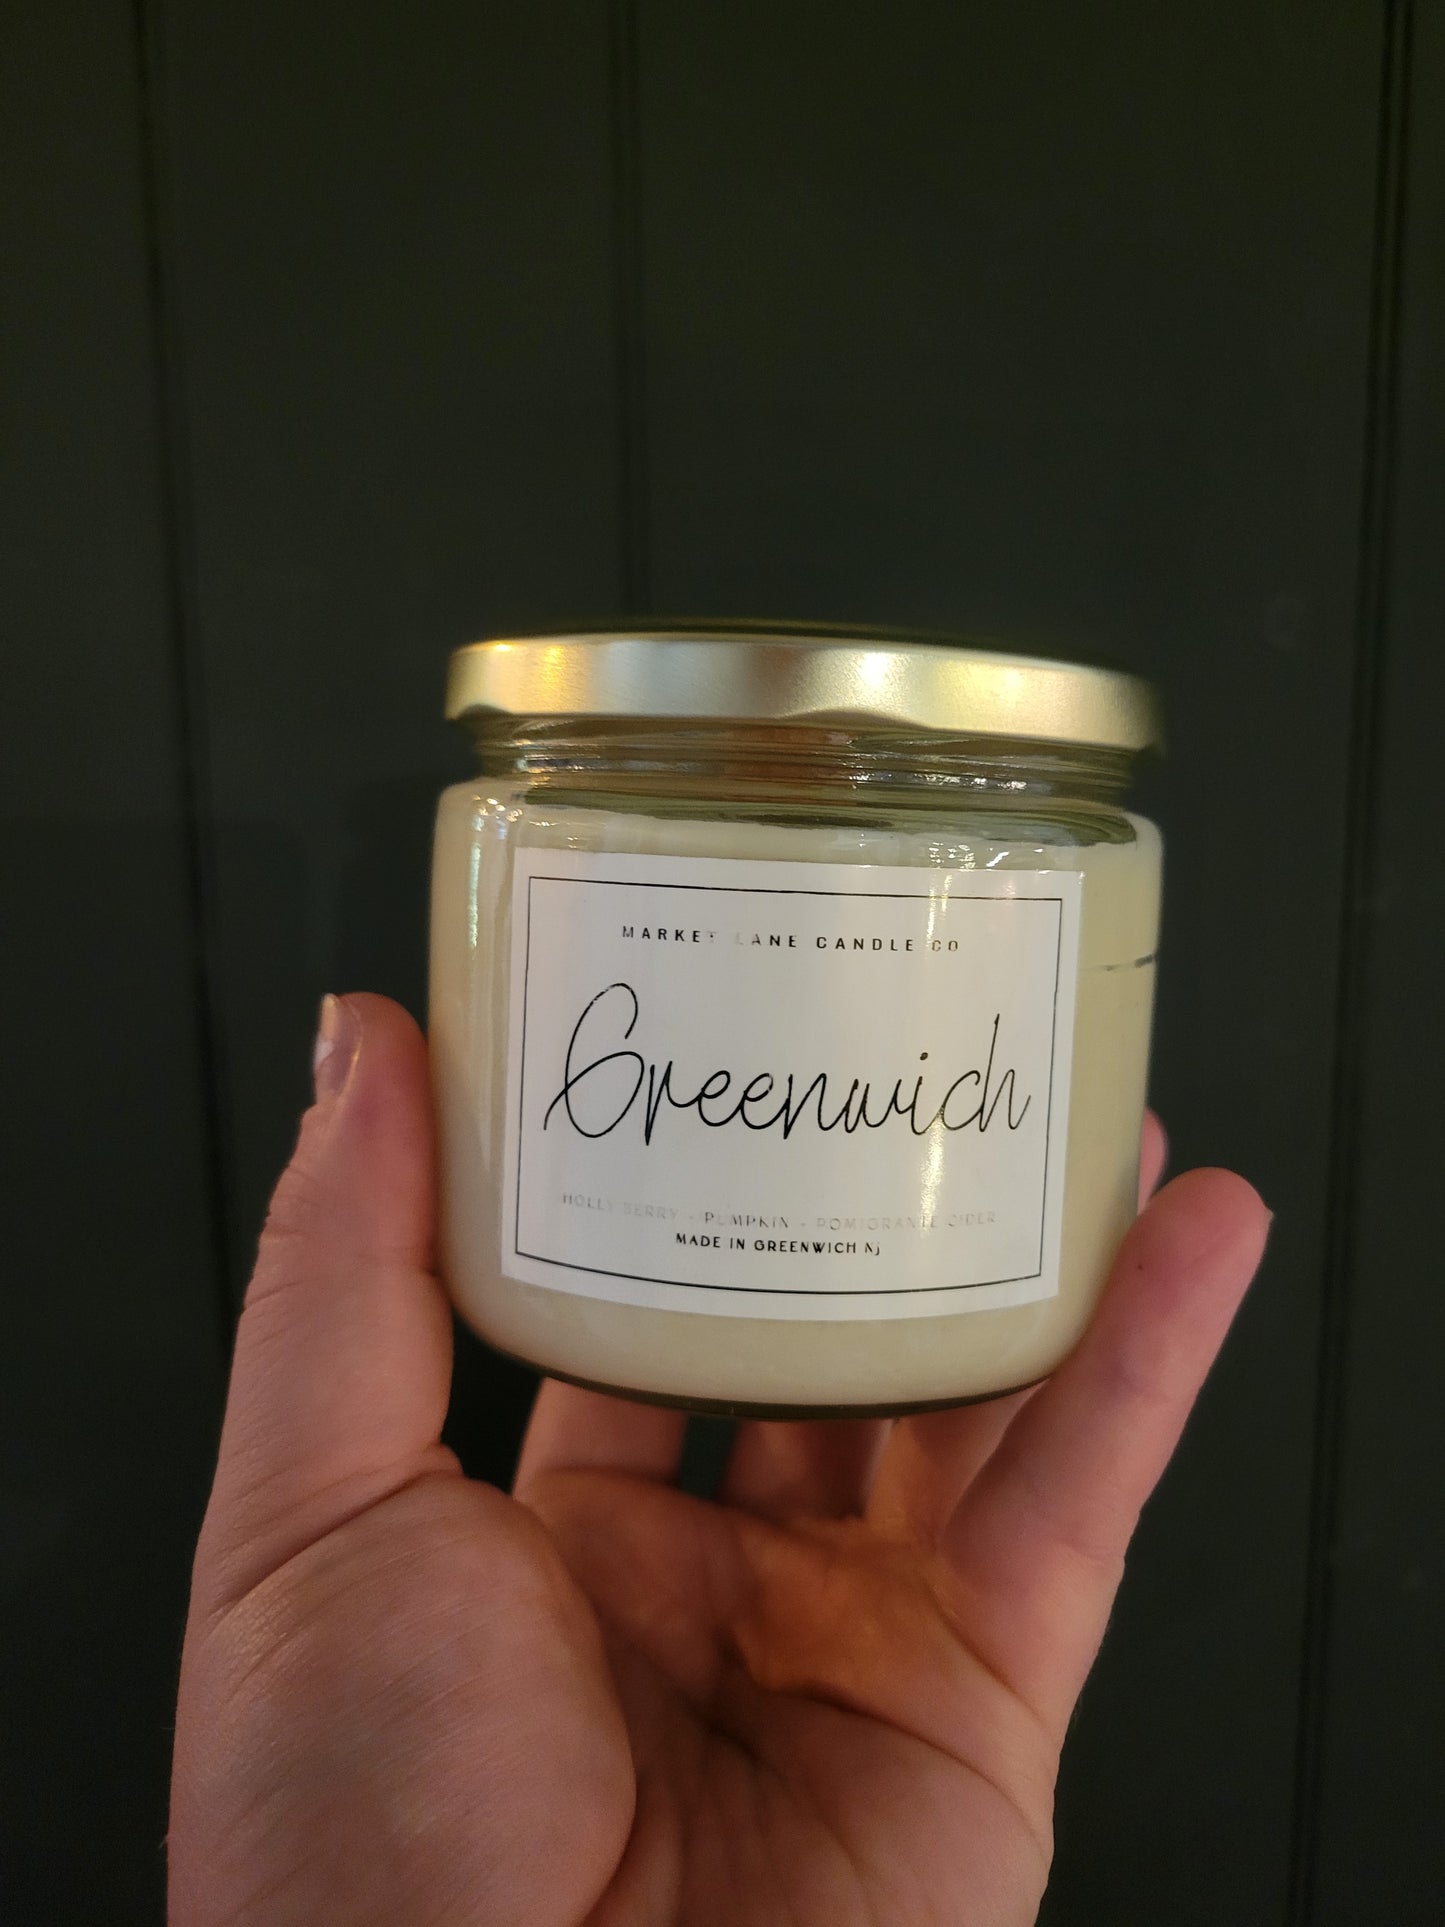 Greenwich Candles!